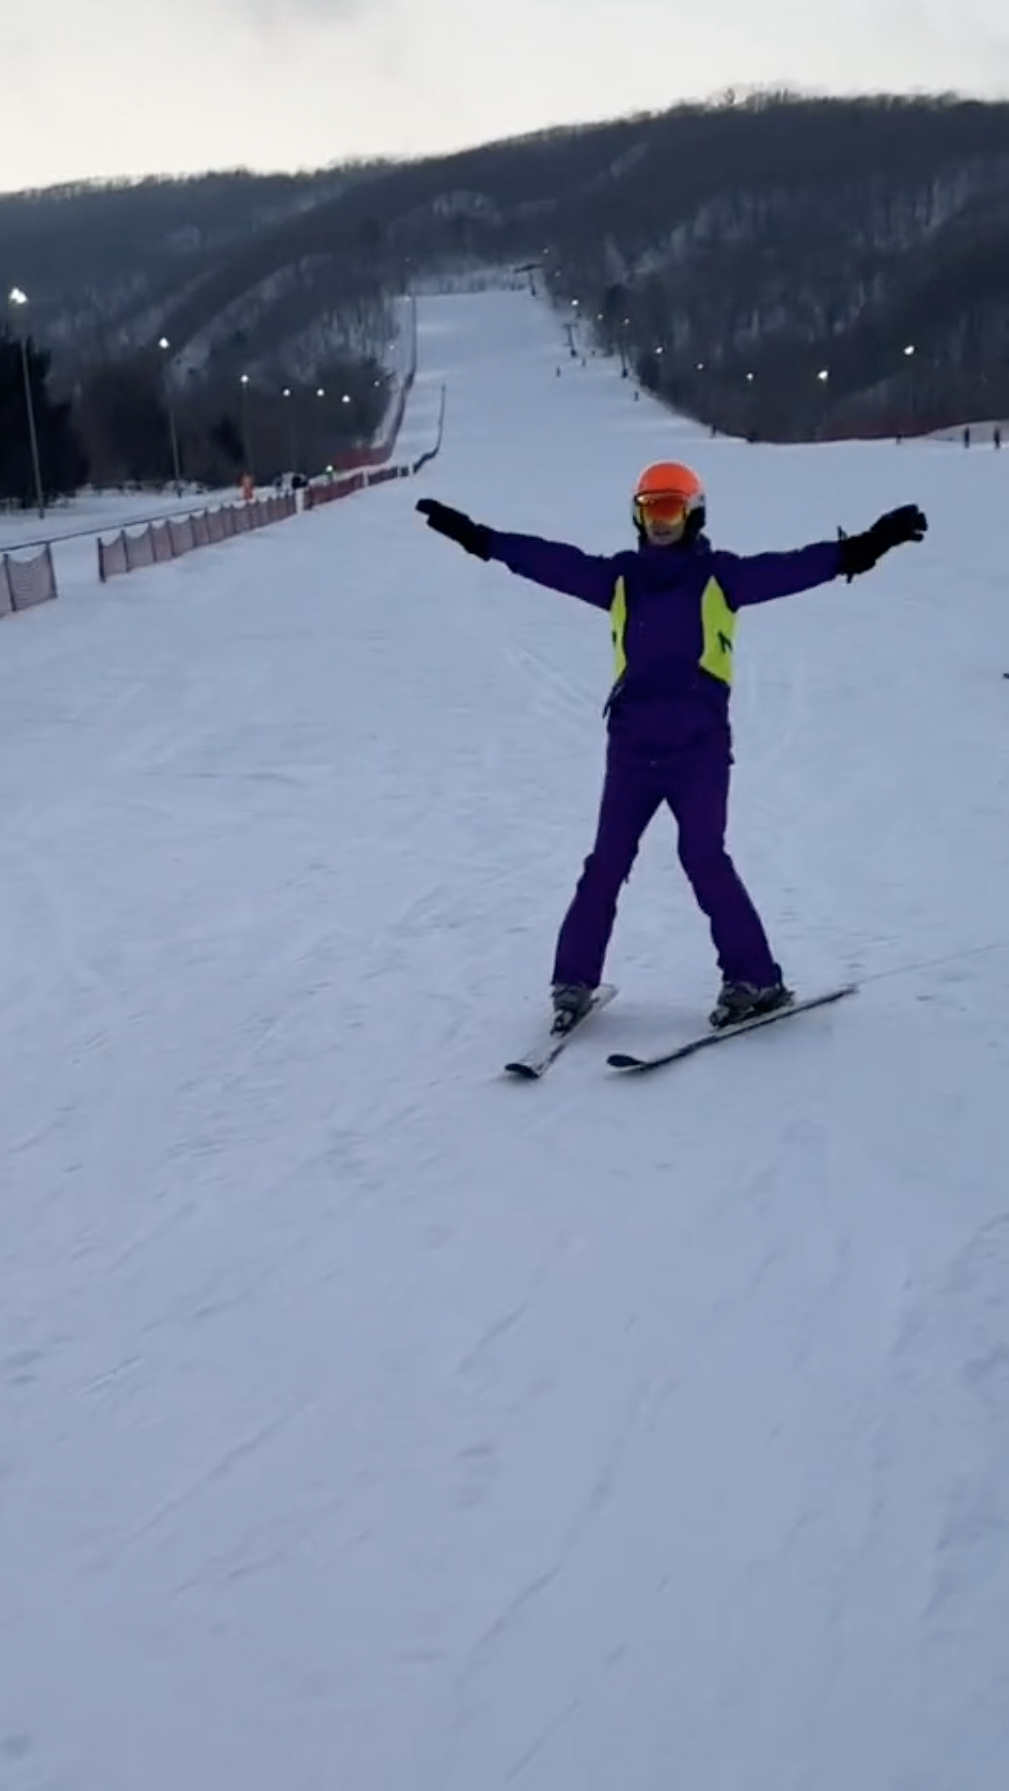 Viktoria has shared footage of her first time skiing